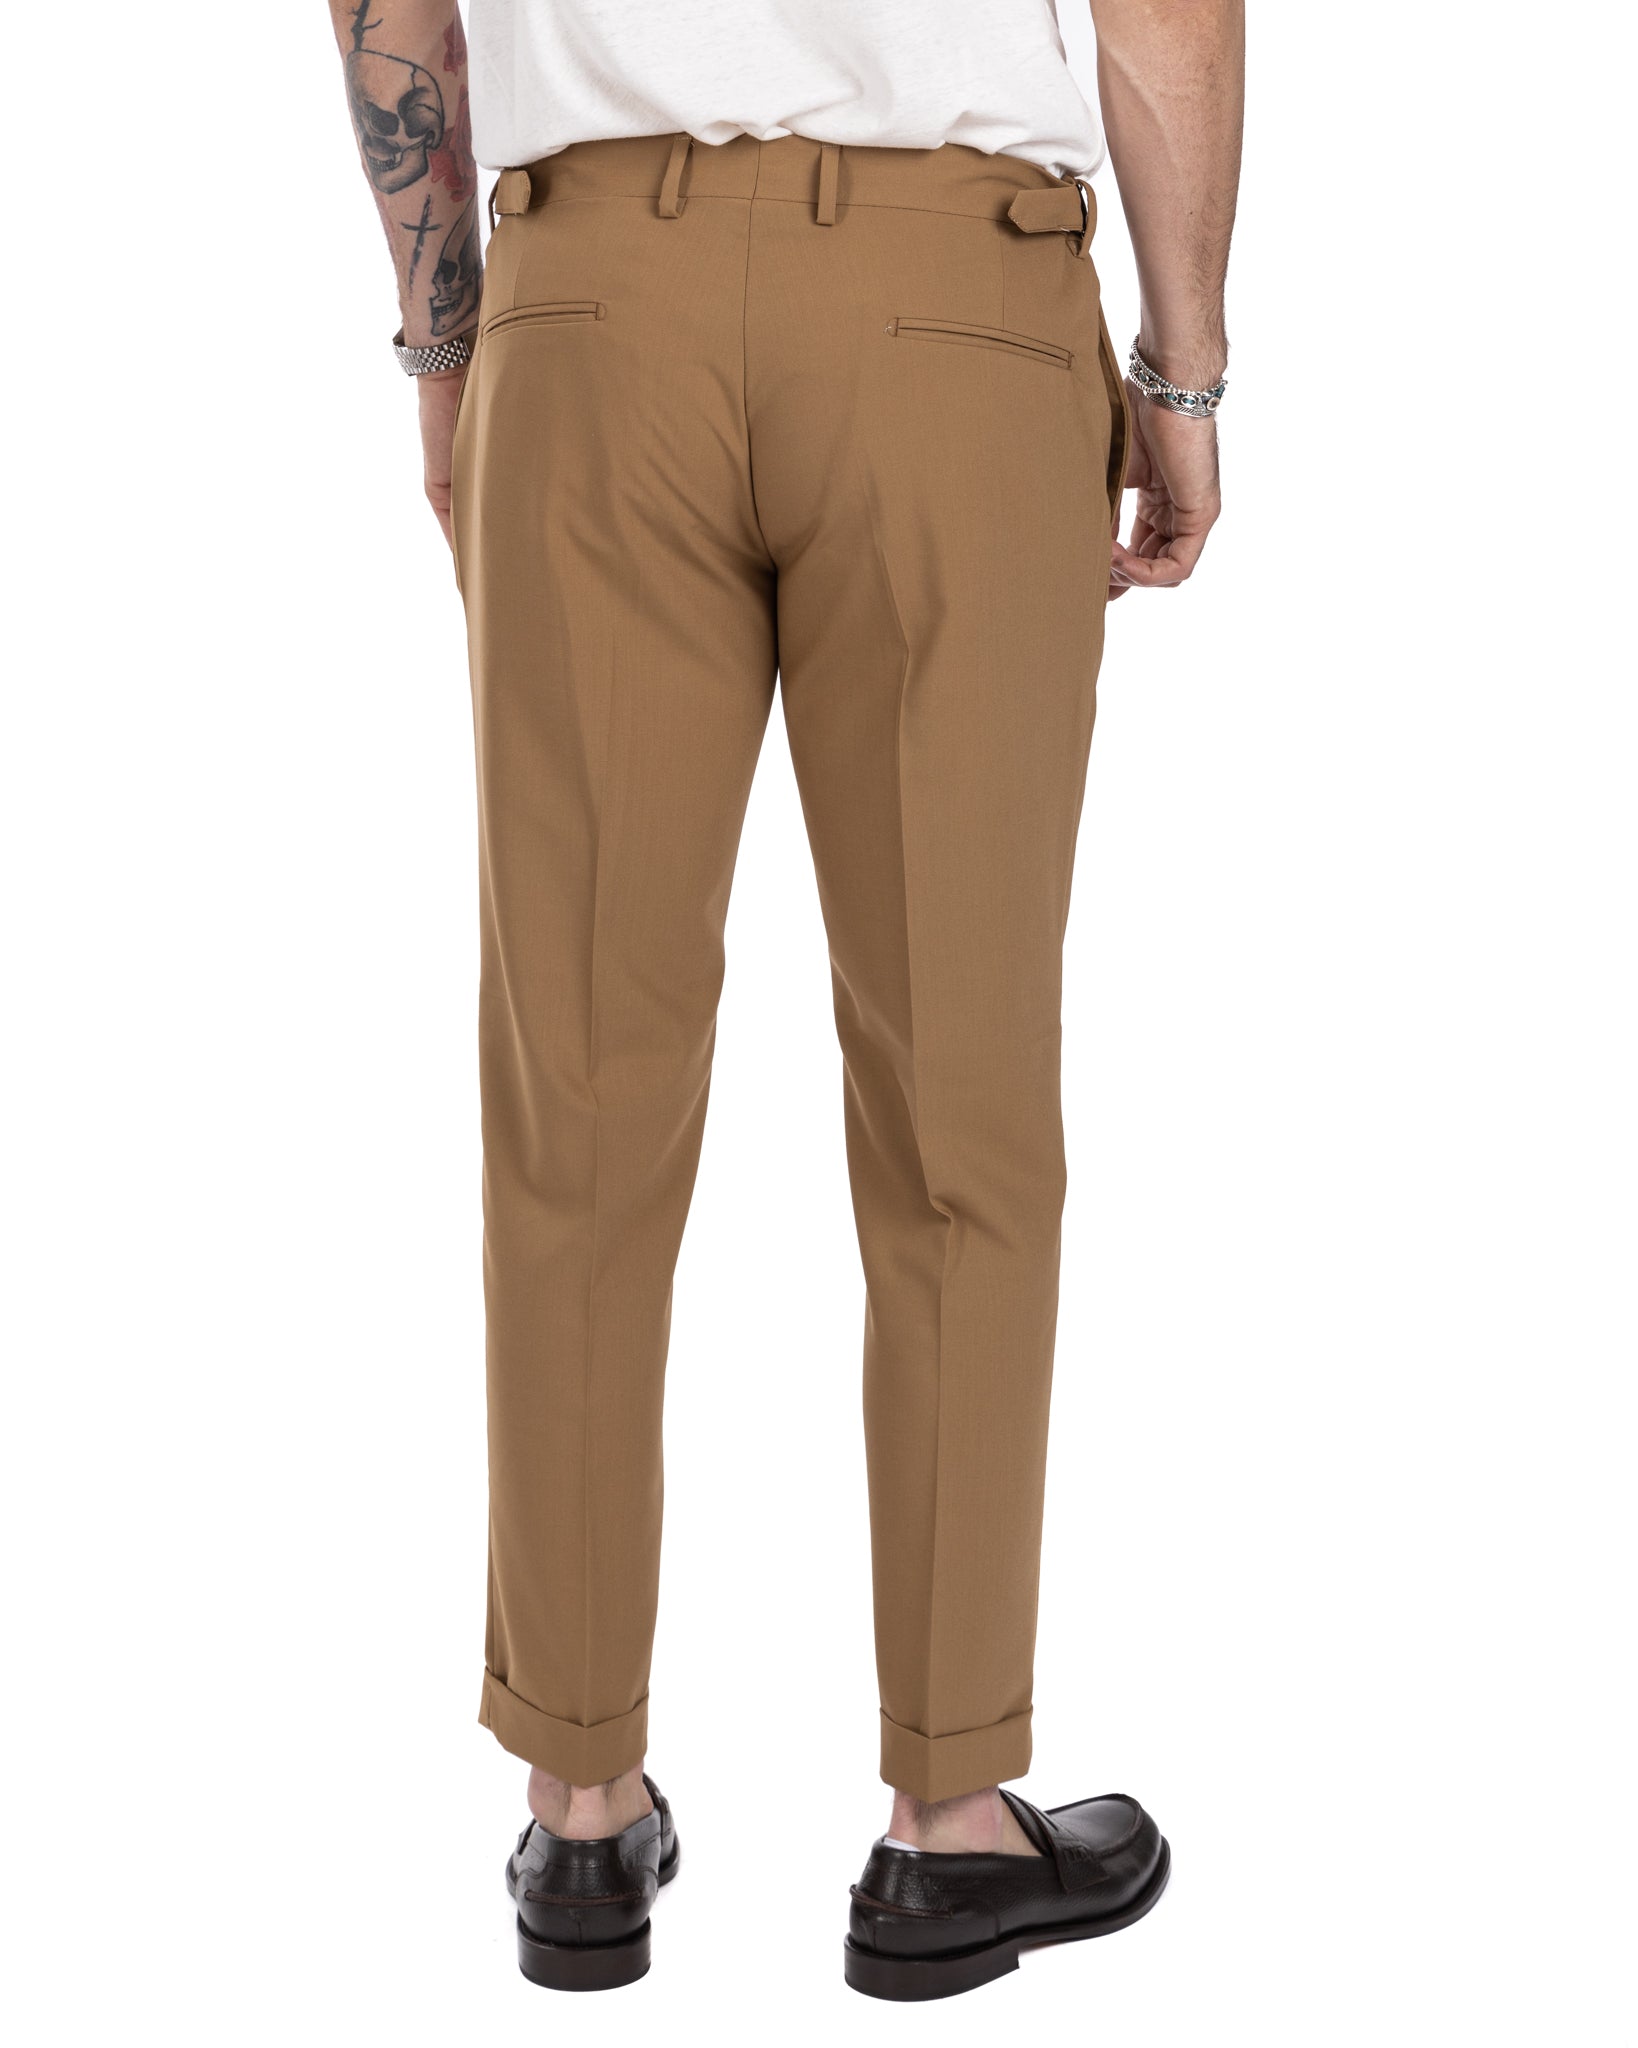 Trani - trousers with beige buckles